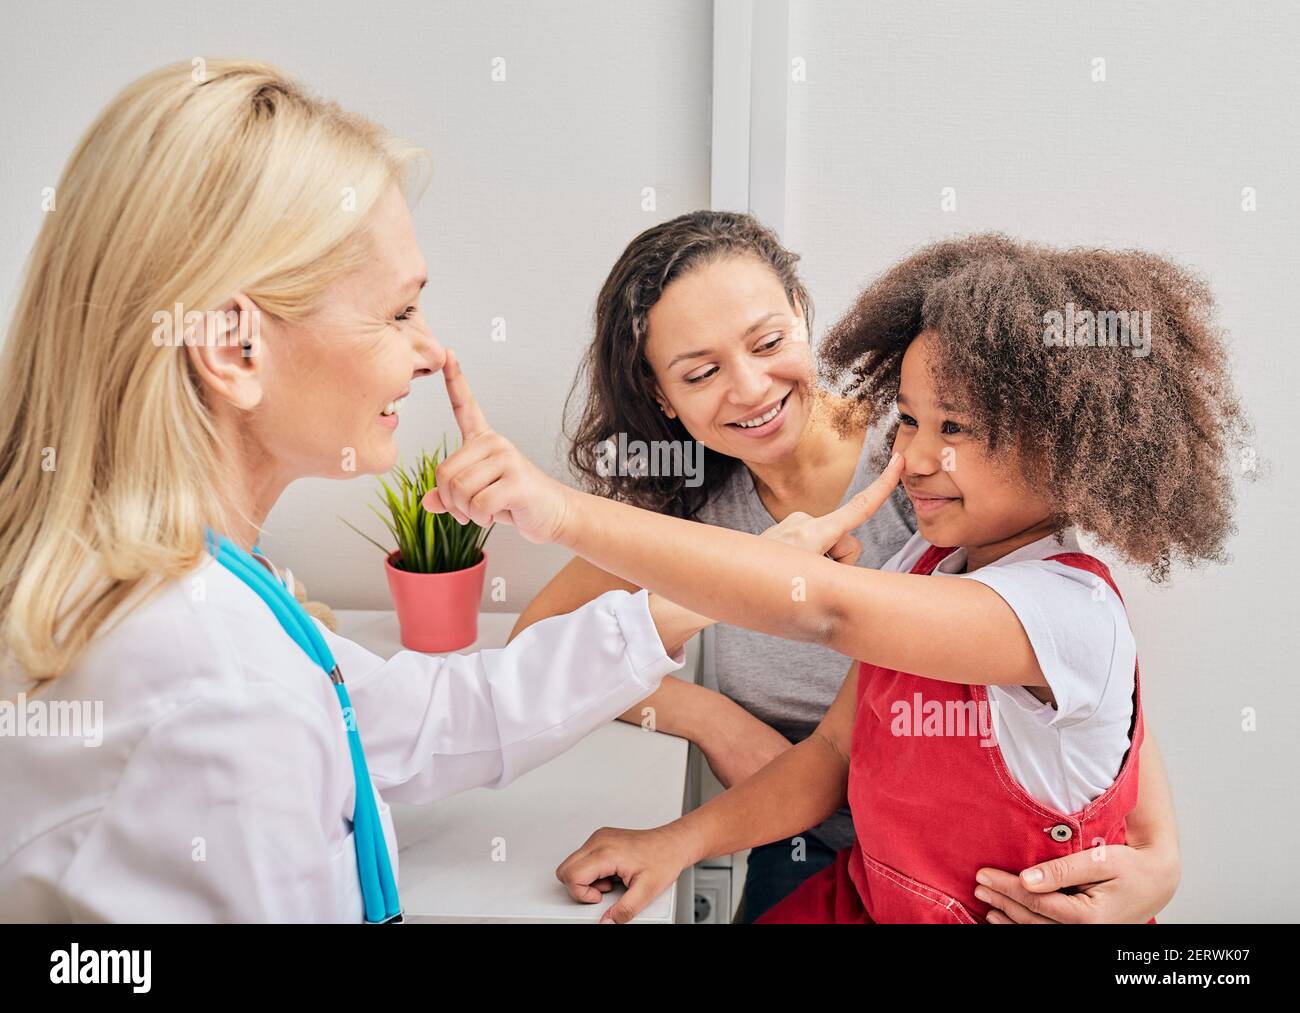 Friendly pediatrician having fun with her child patient at hospital. Consultation, kid health Stock Photo